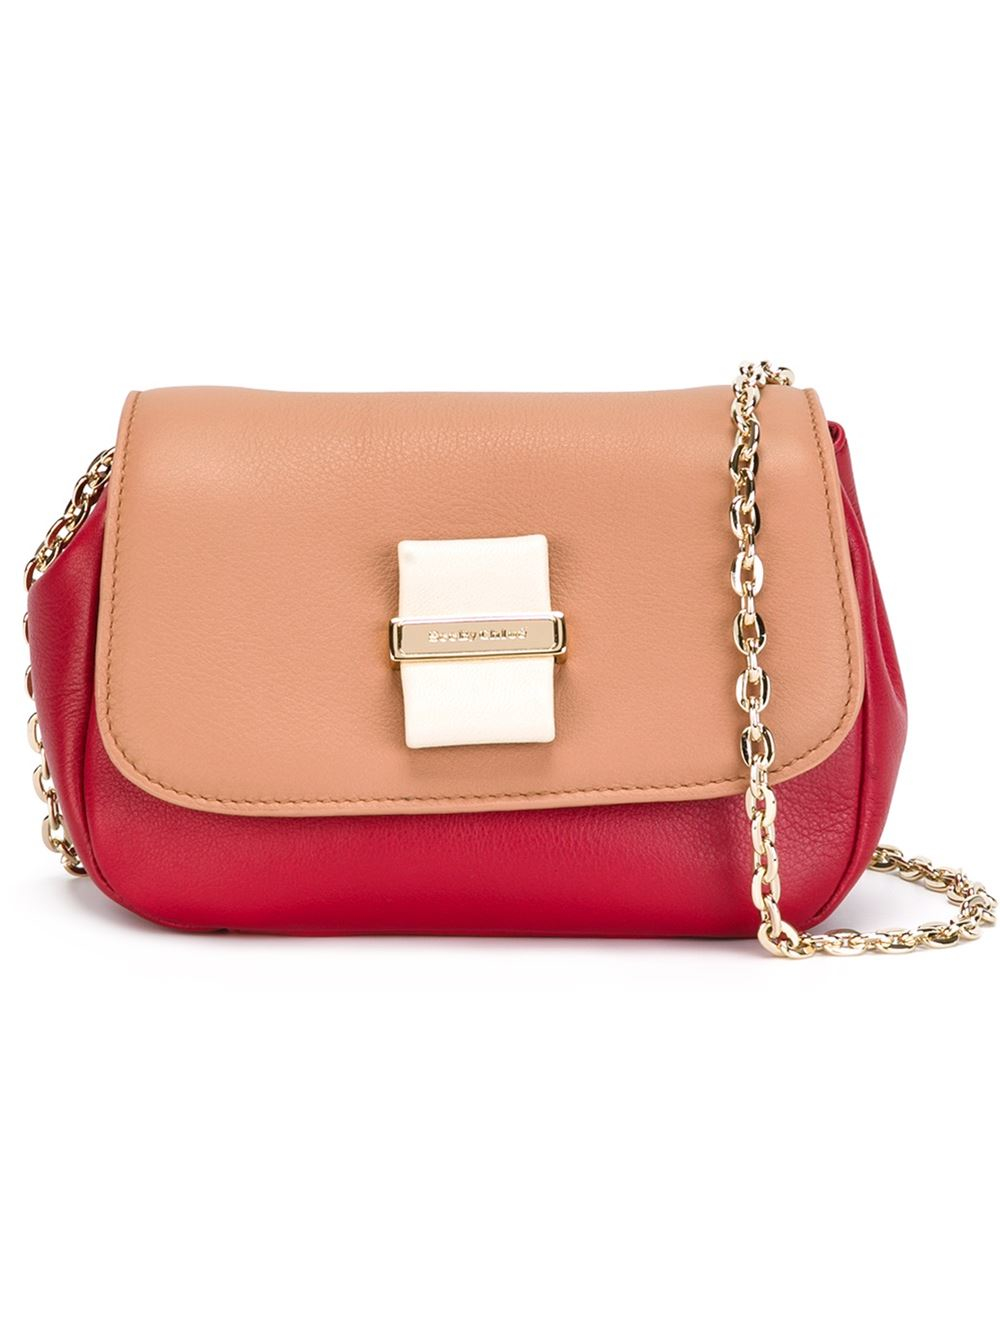 See By Chloé Mini Rosita Cross-Body Bag in Red (Natural) - Lyst